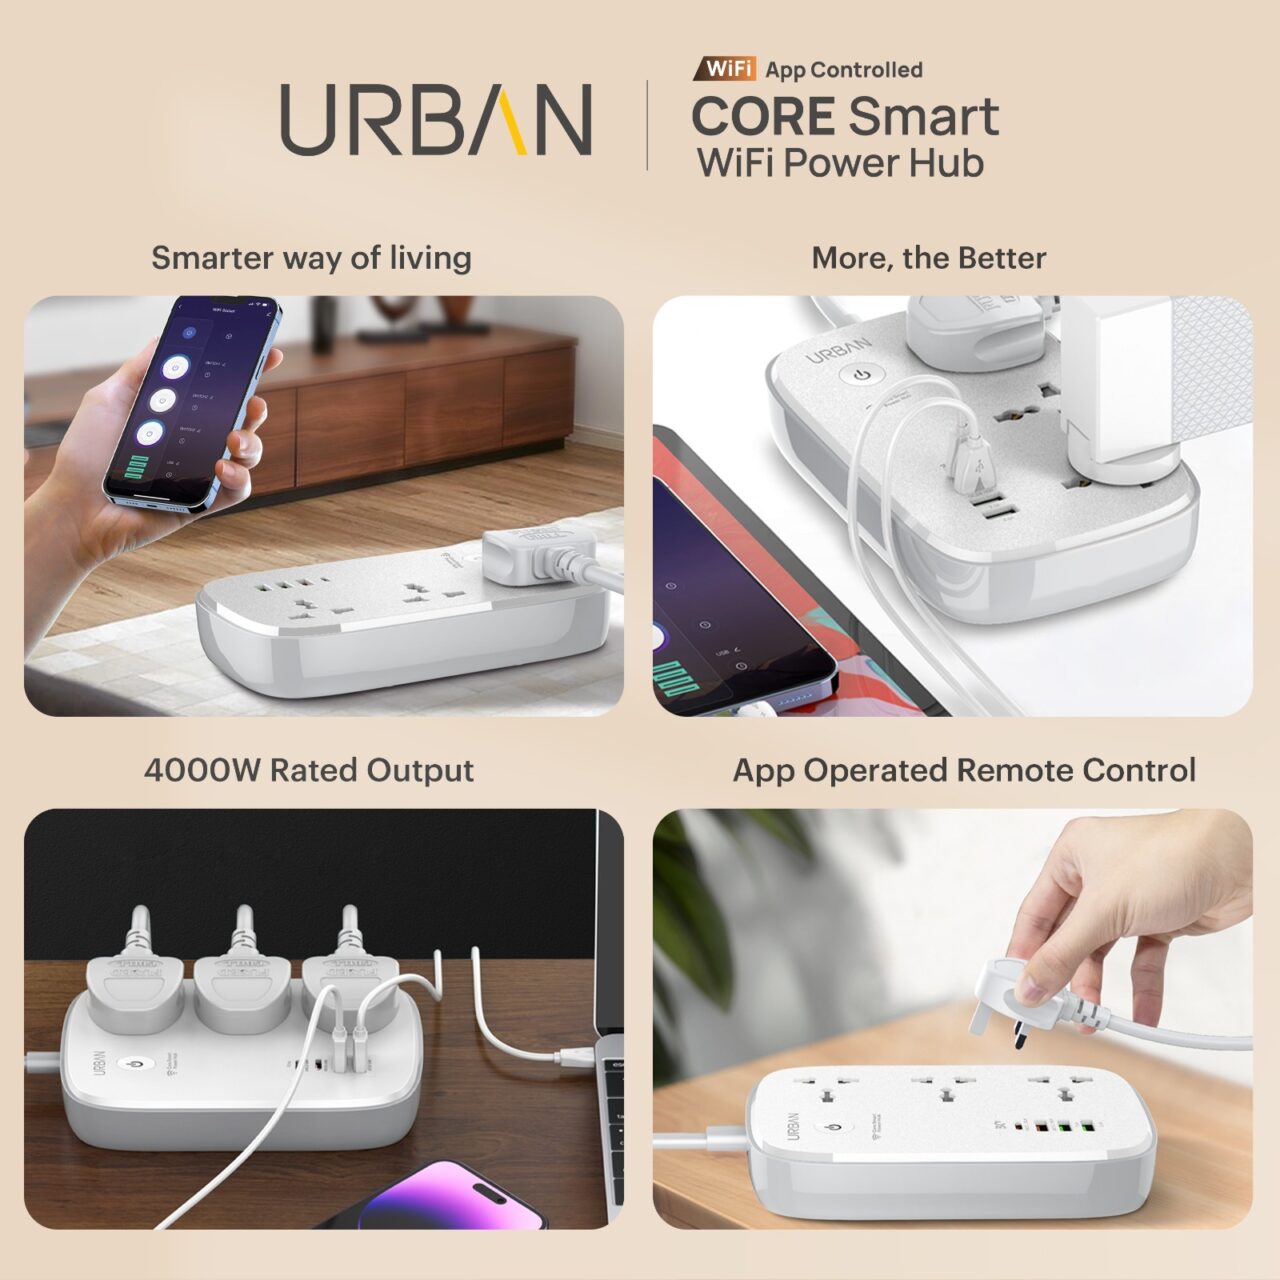 URBAN Unveils Smart WiFi Power Hub for Home Automation